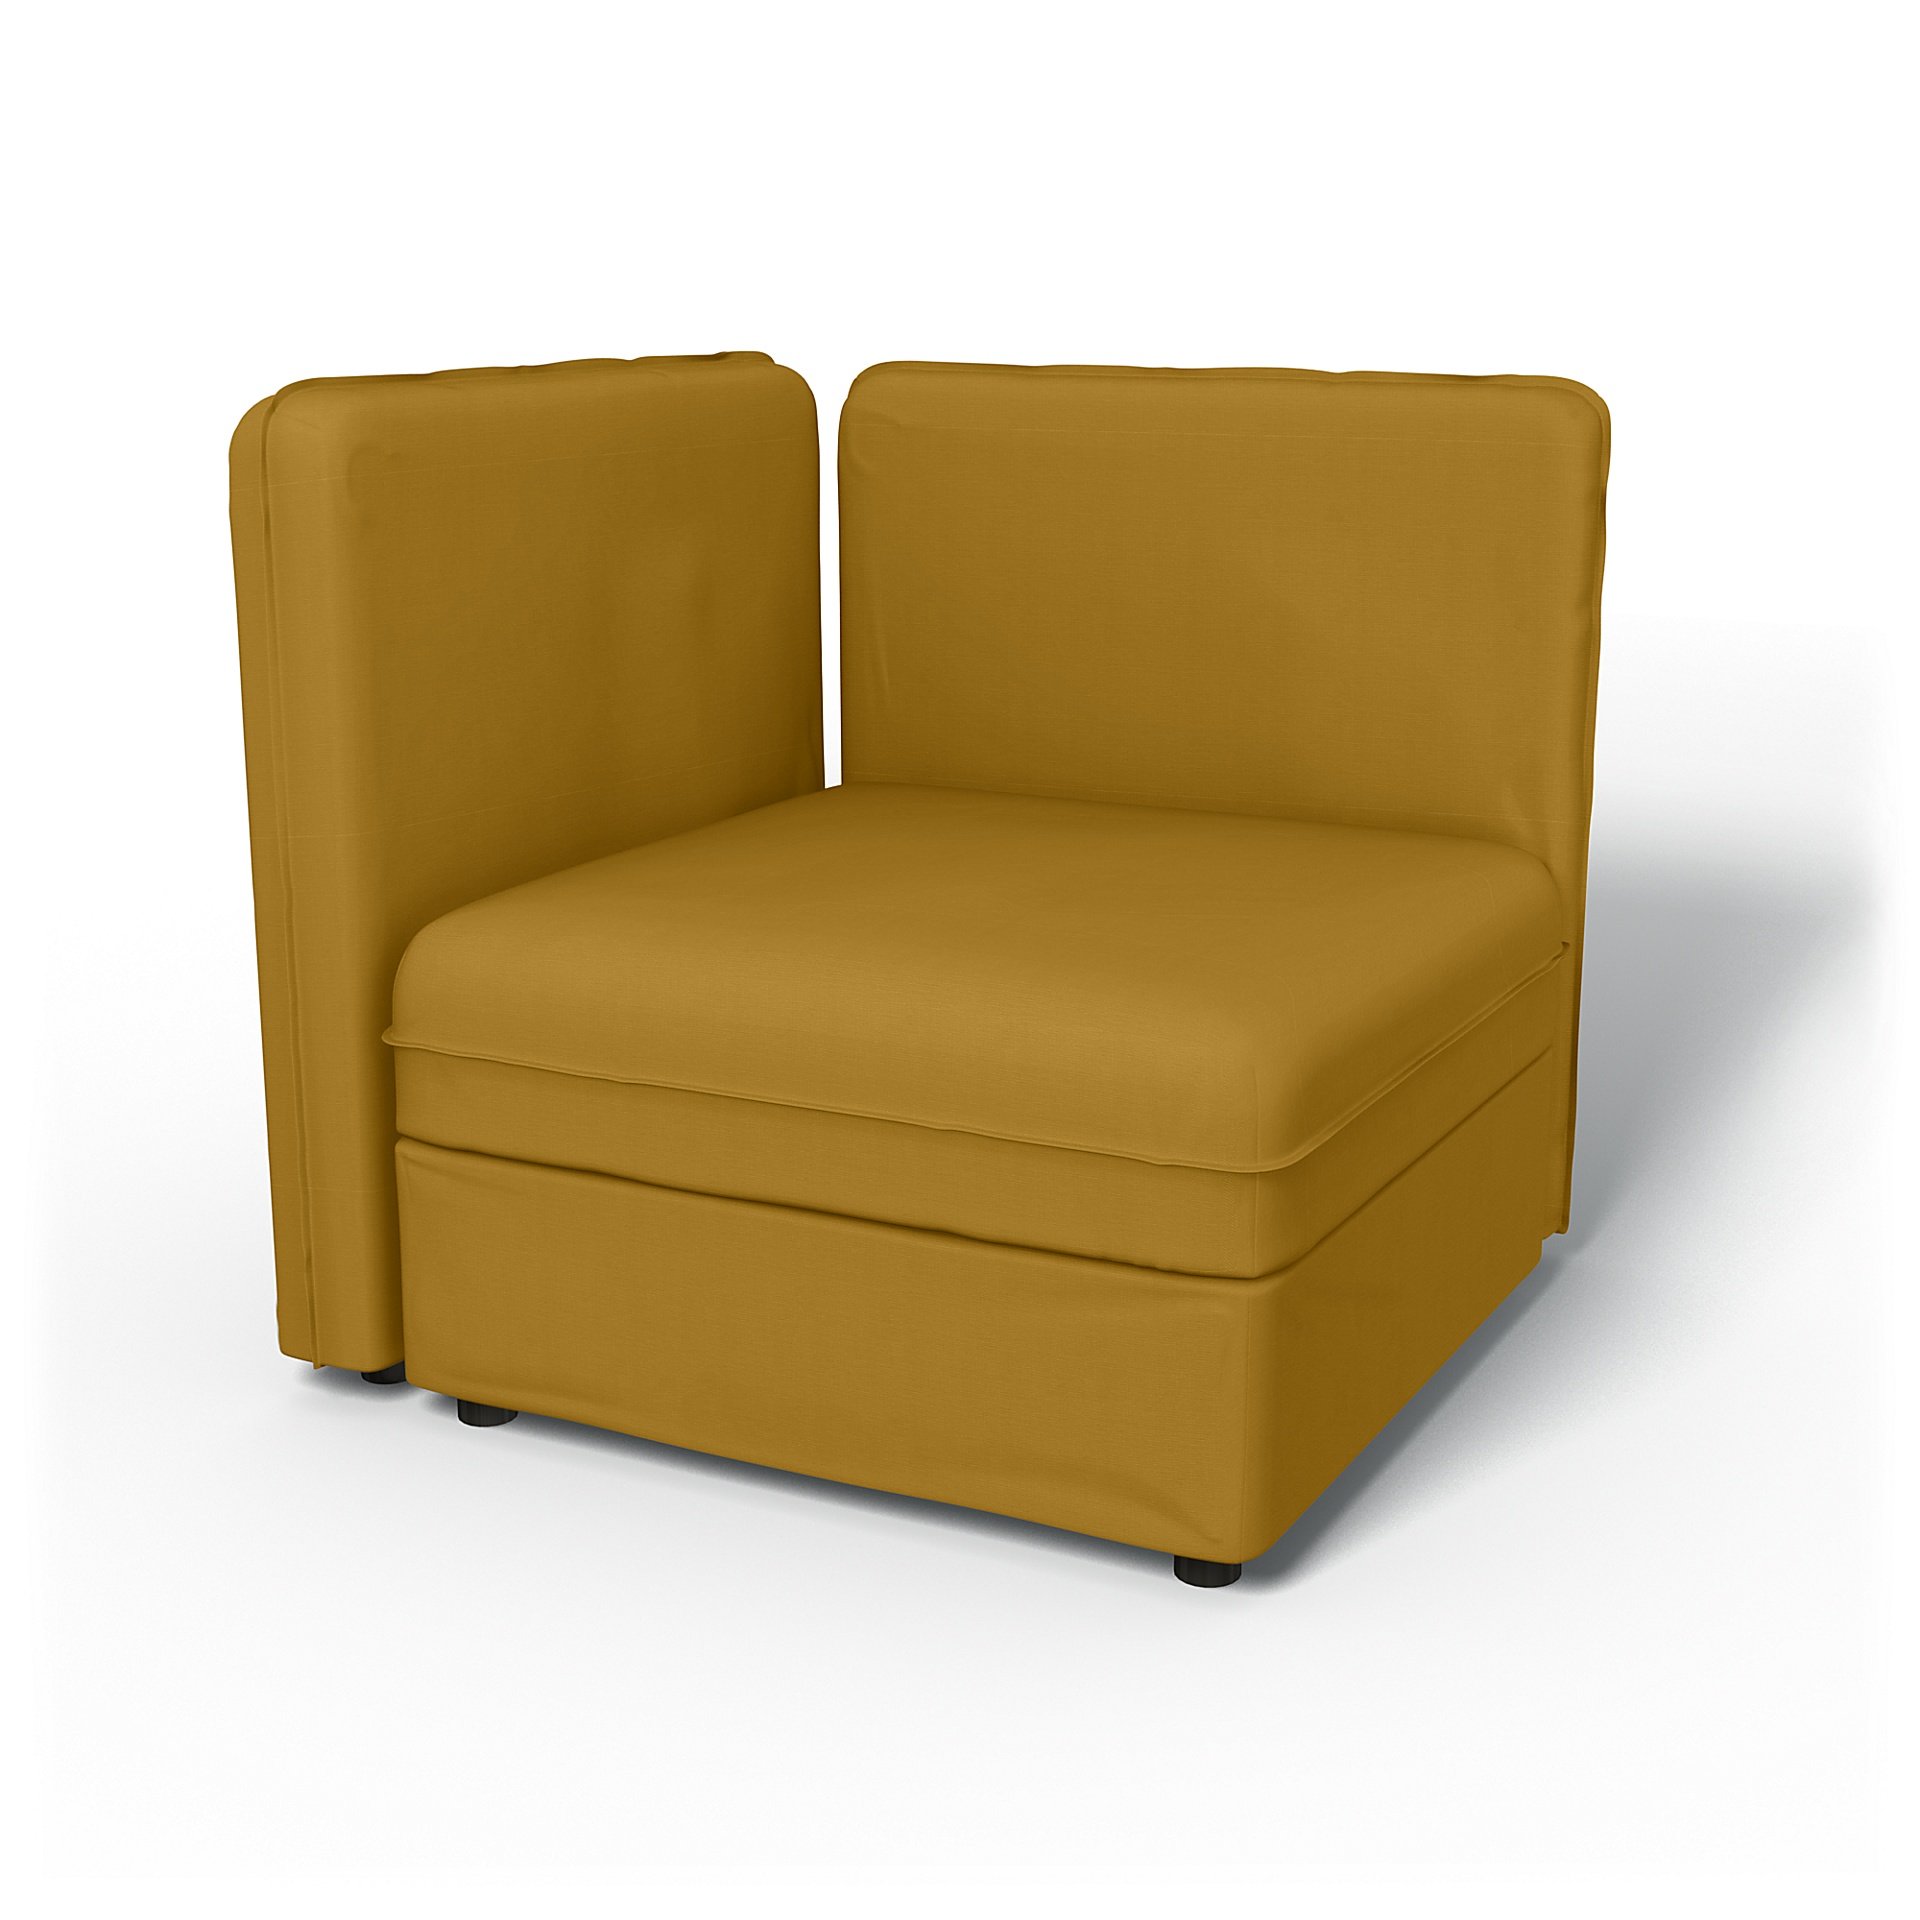 IKEA - Vallentuna Seat Module with Low Back and Storage Cover 80x80cm 32x32in, Honey Mustard, Cotton